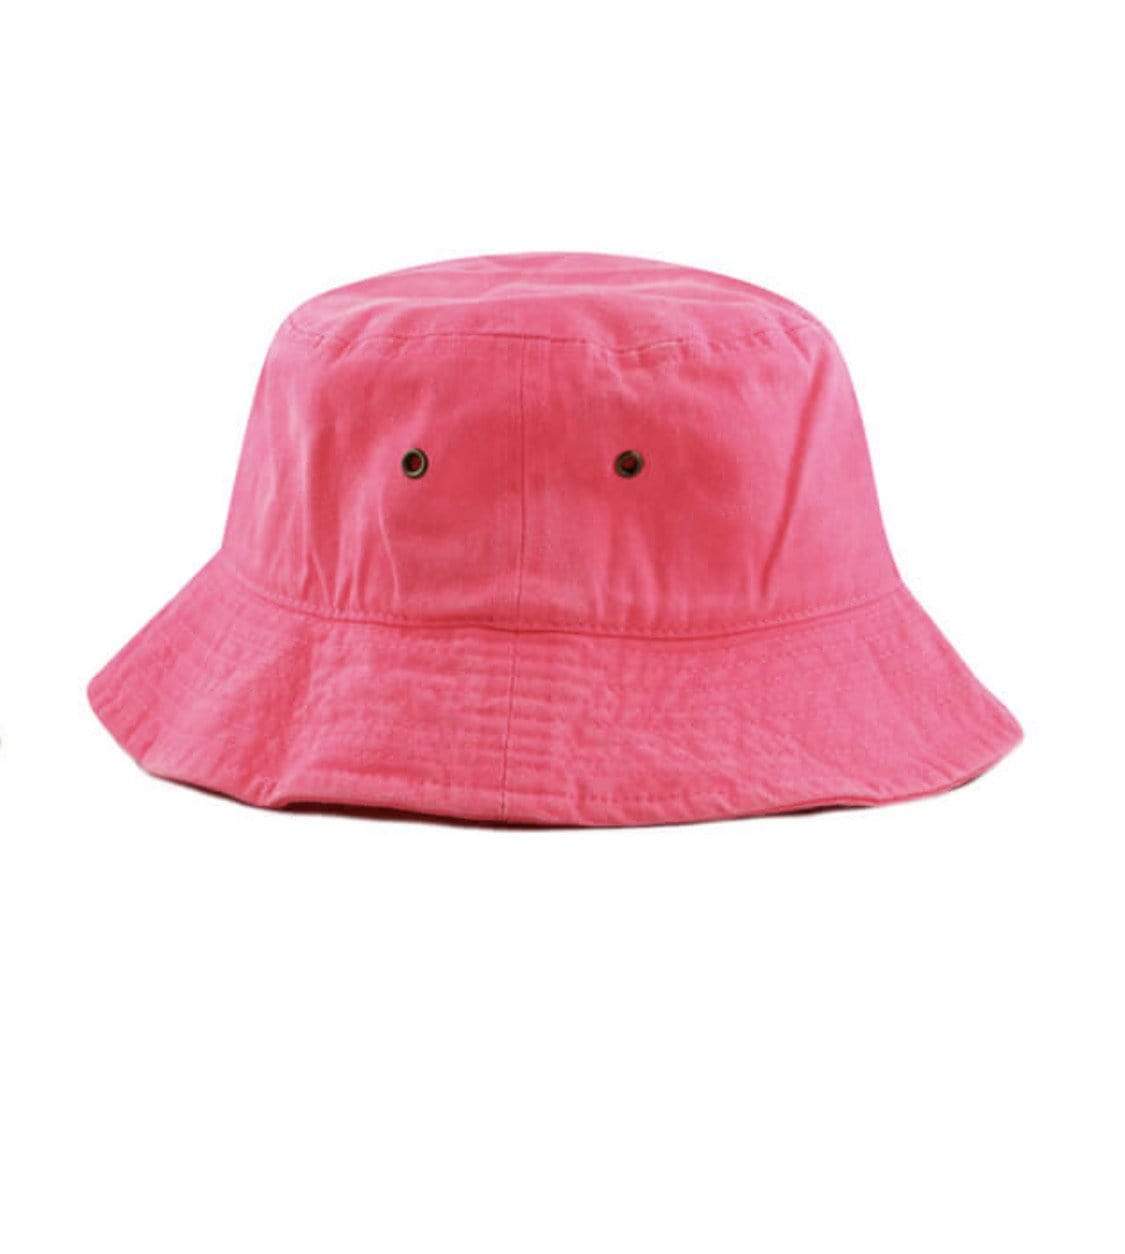 Grooveman Music Hats L/XL / Neon Pink Solid Bucket Fitted Hat